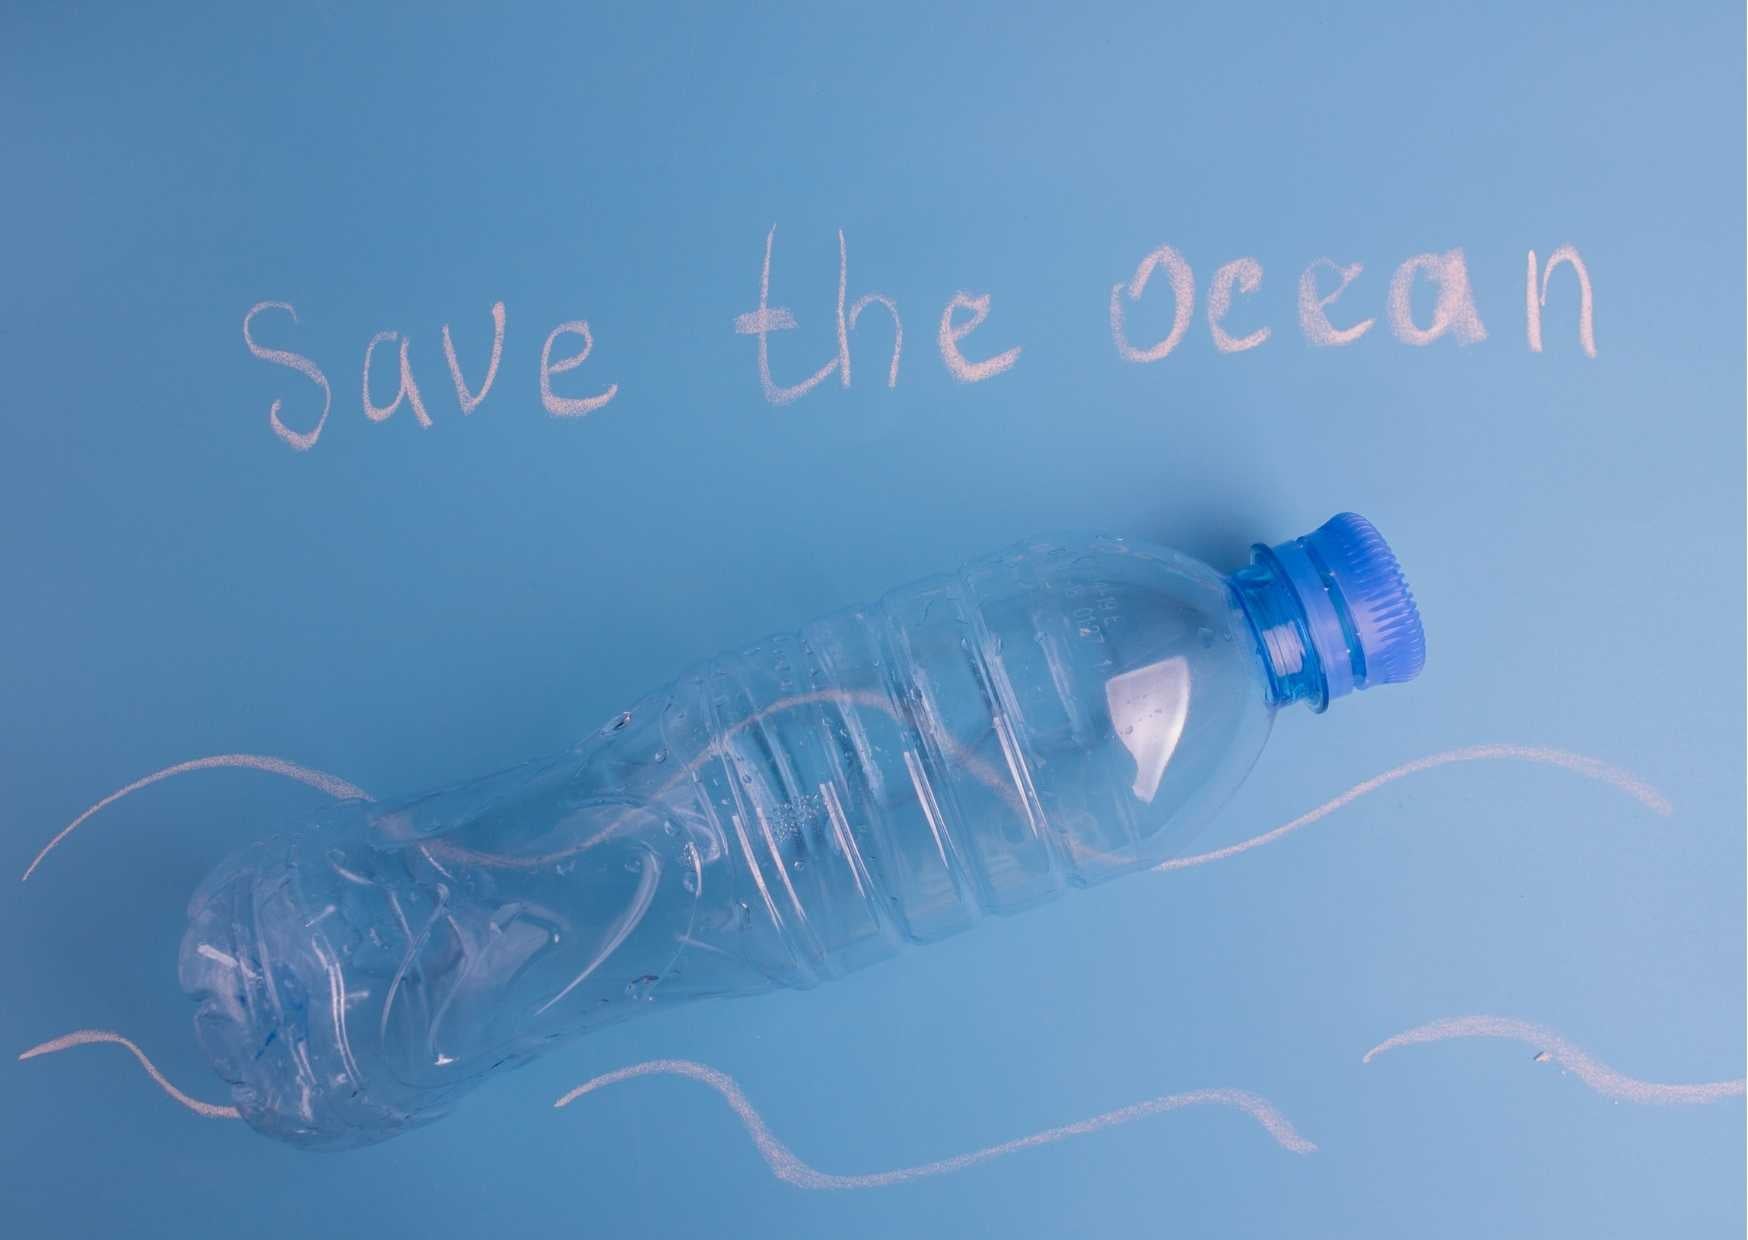 Save the ocean | The Great Pacific Ocean Garbage Patch